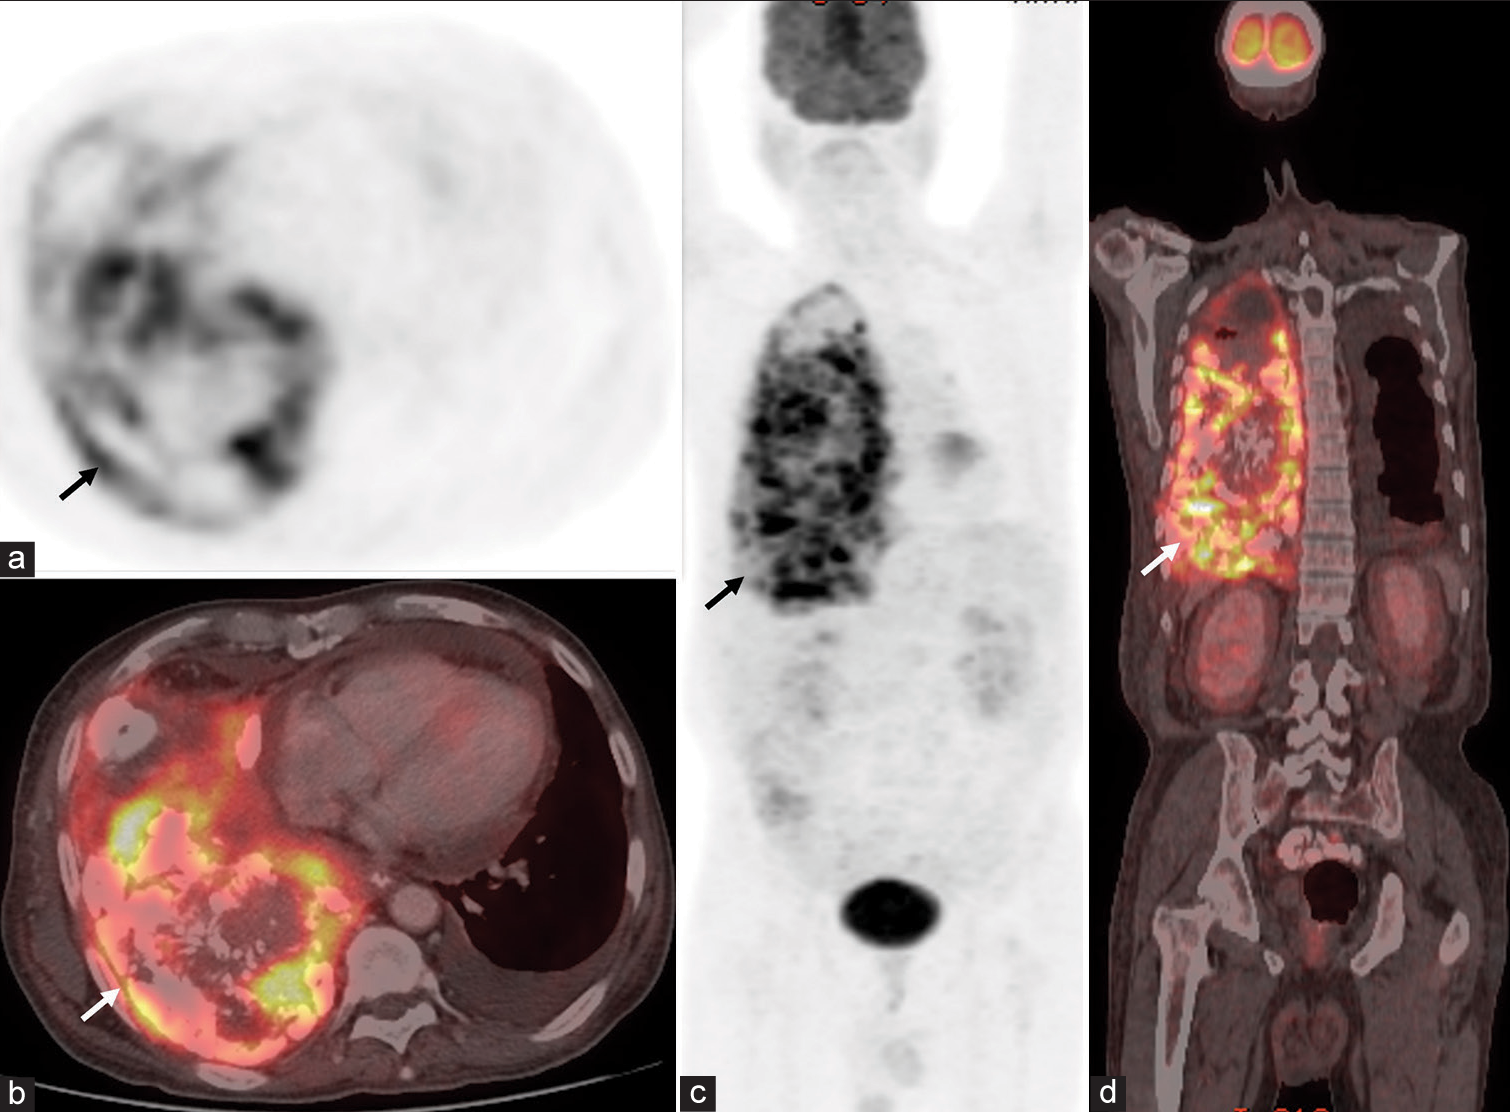 (a-b) Axial chest positron emission tomography (PET) and fusion positron emission tomography/computed tomography (PET/CT) images show hypermetabolic mass with calcifications/ ossifications in right lung (arrows). Left pleural effusion is also seen. (c-d) Whole body PET and fusion PET/CT images show the right lung lesion (arrows). No other malignant lesion is seen.